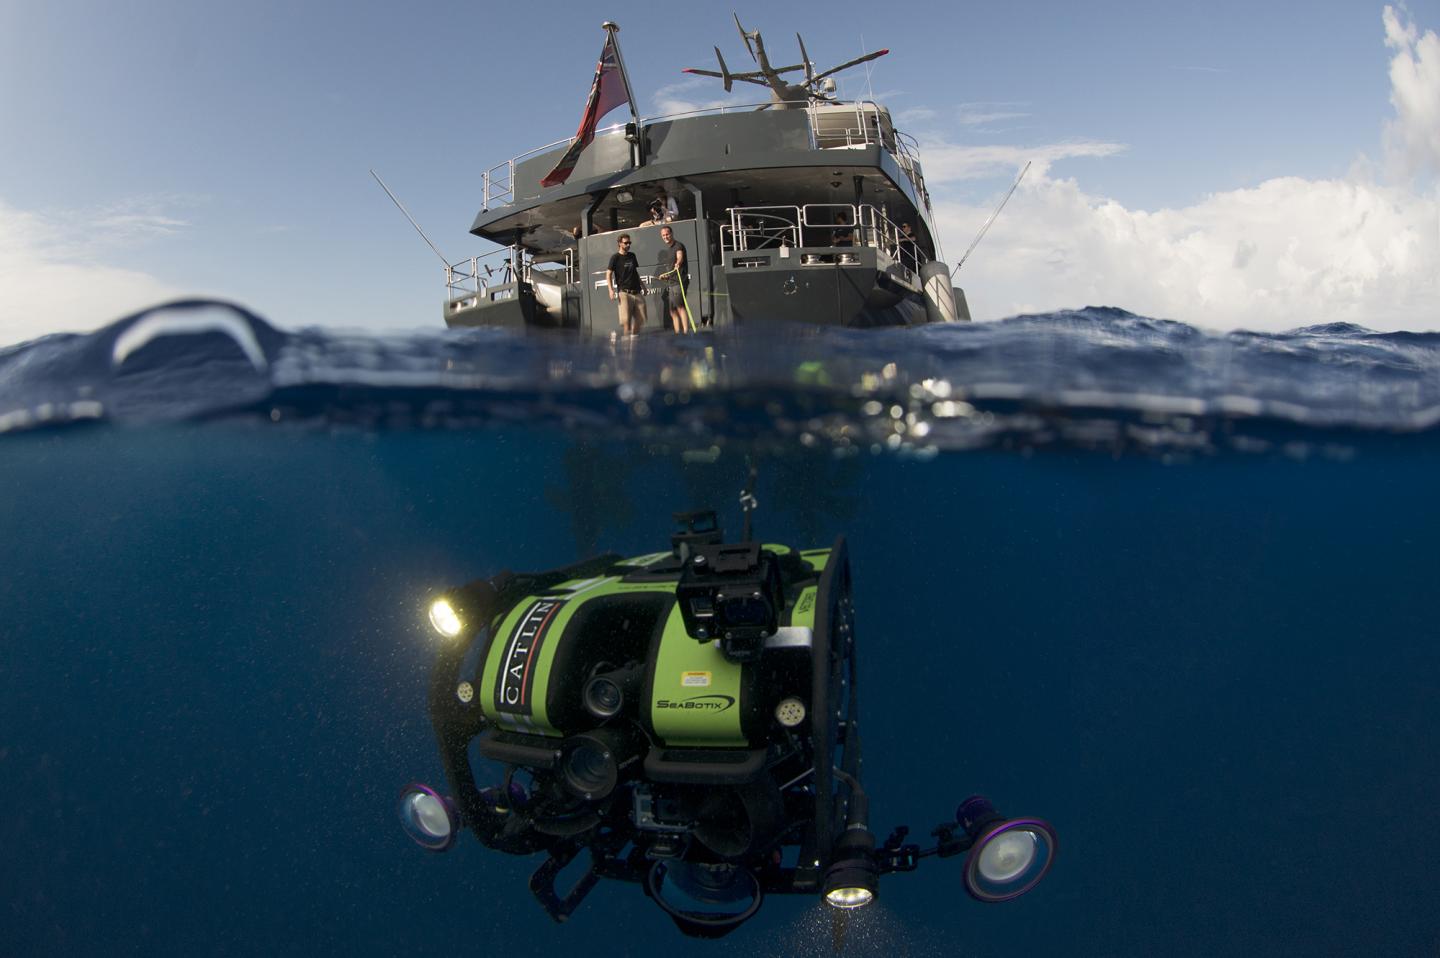 Academy researcher Pim Bongaerts deploys a remotely operated vehicle